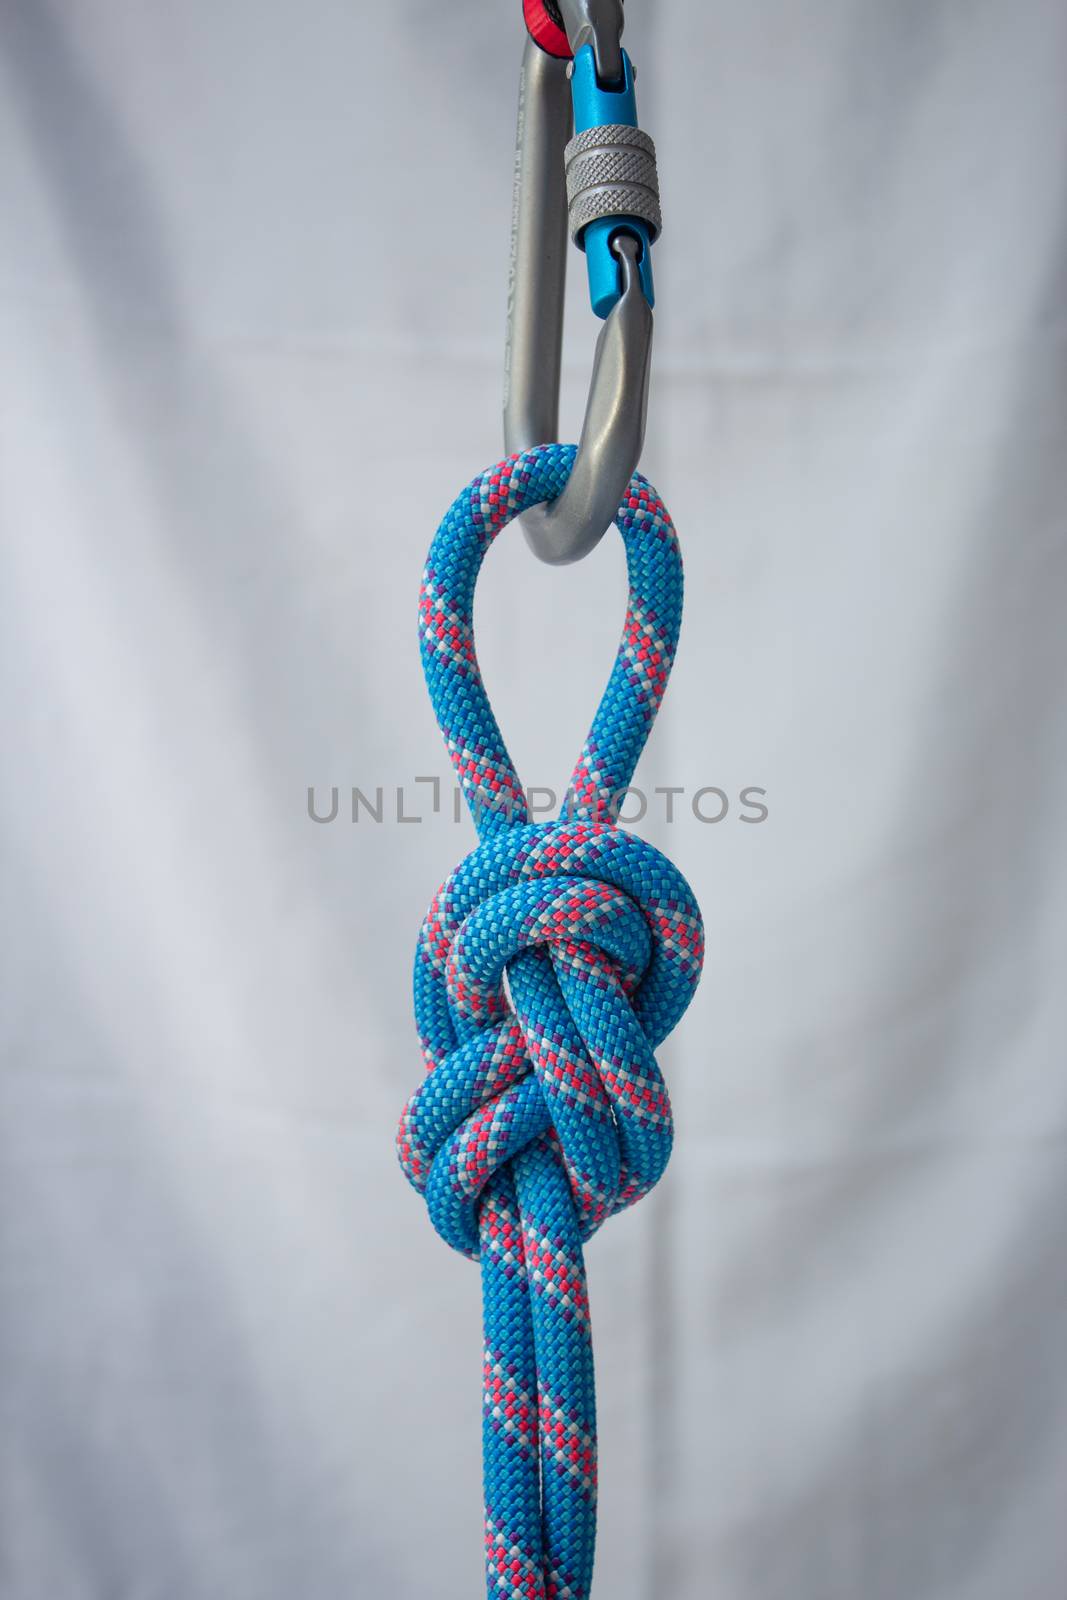 Figure eight on a bight tied with a climbing rope to a pear shaped locking carabiner